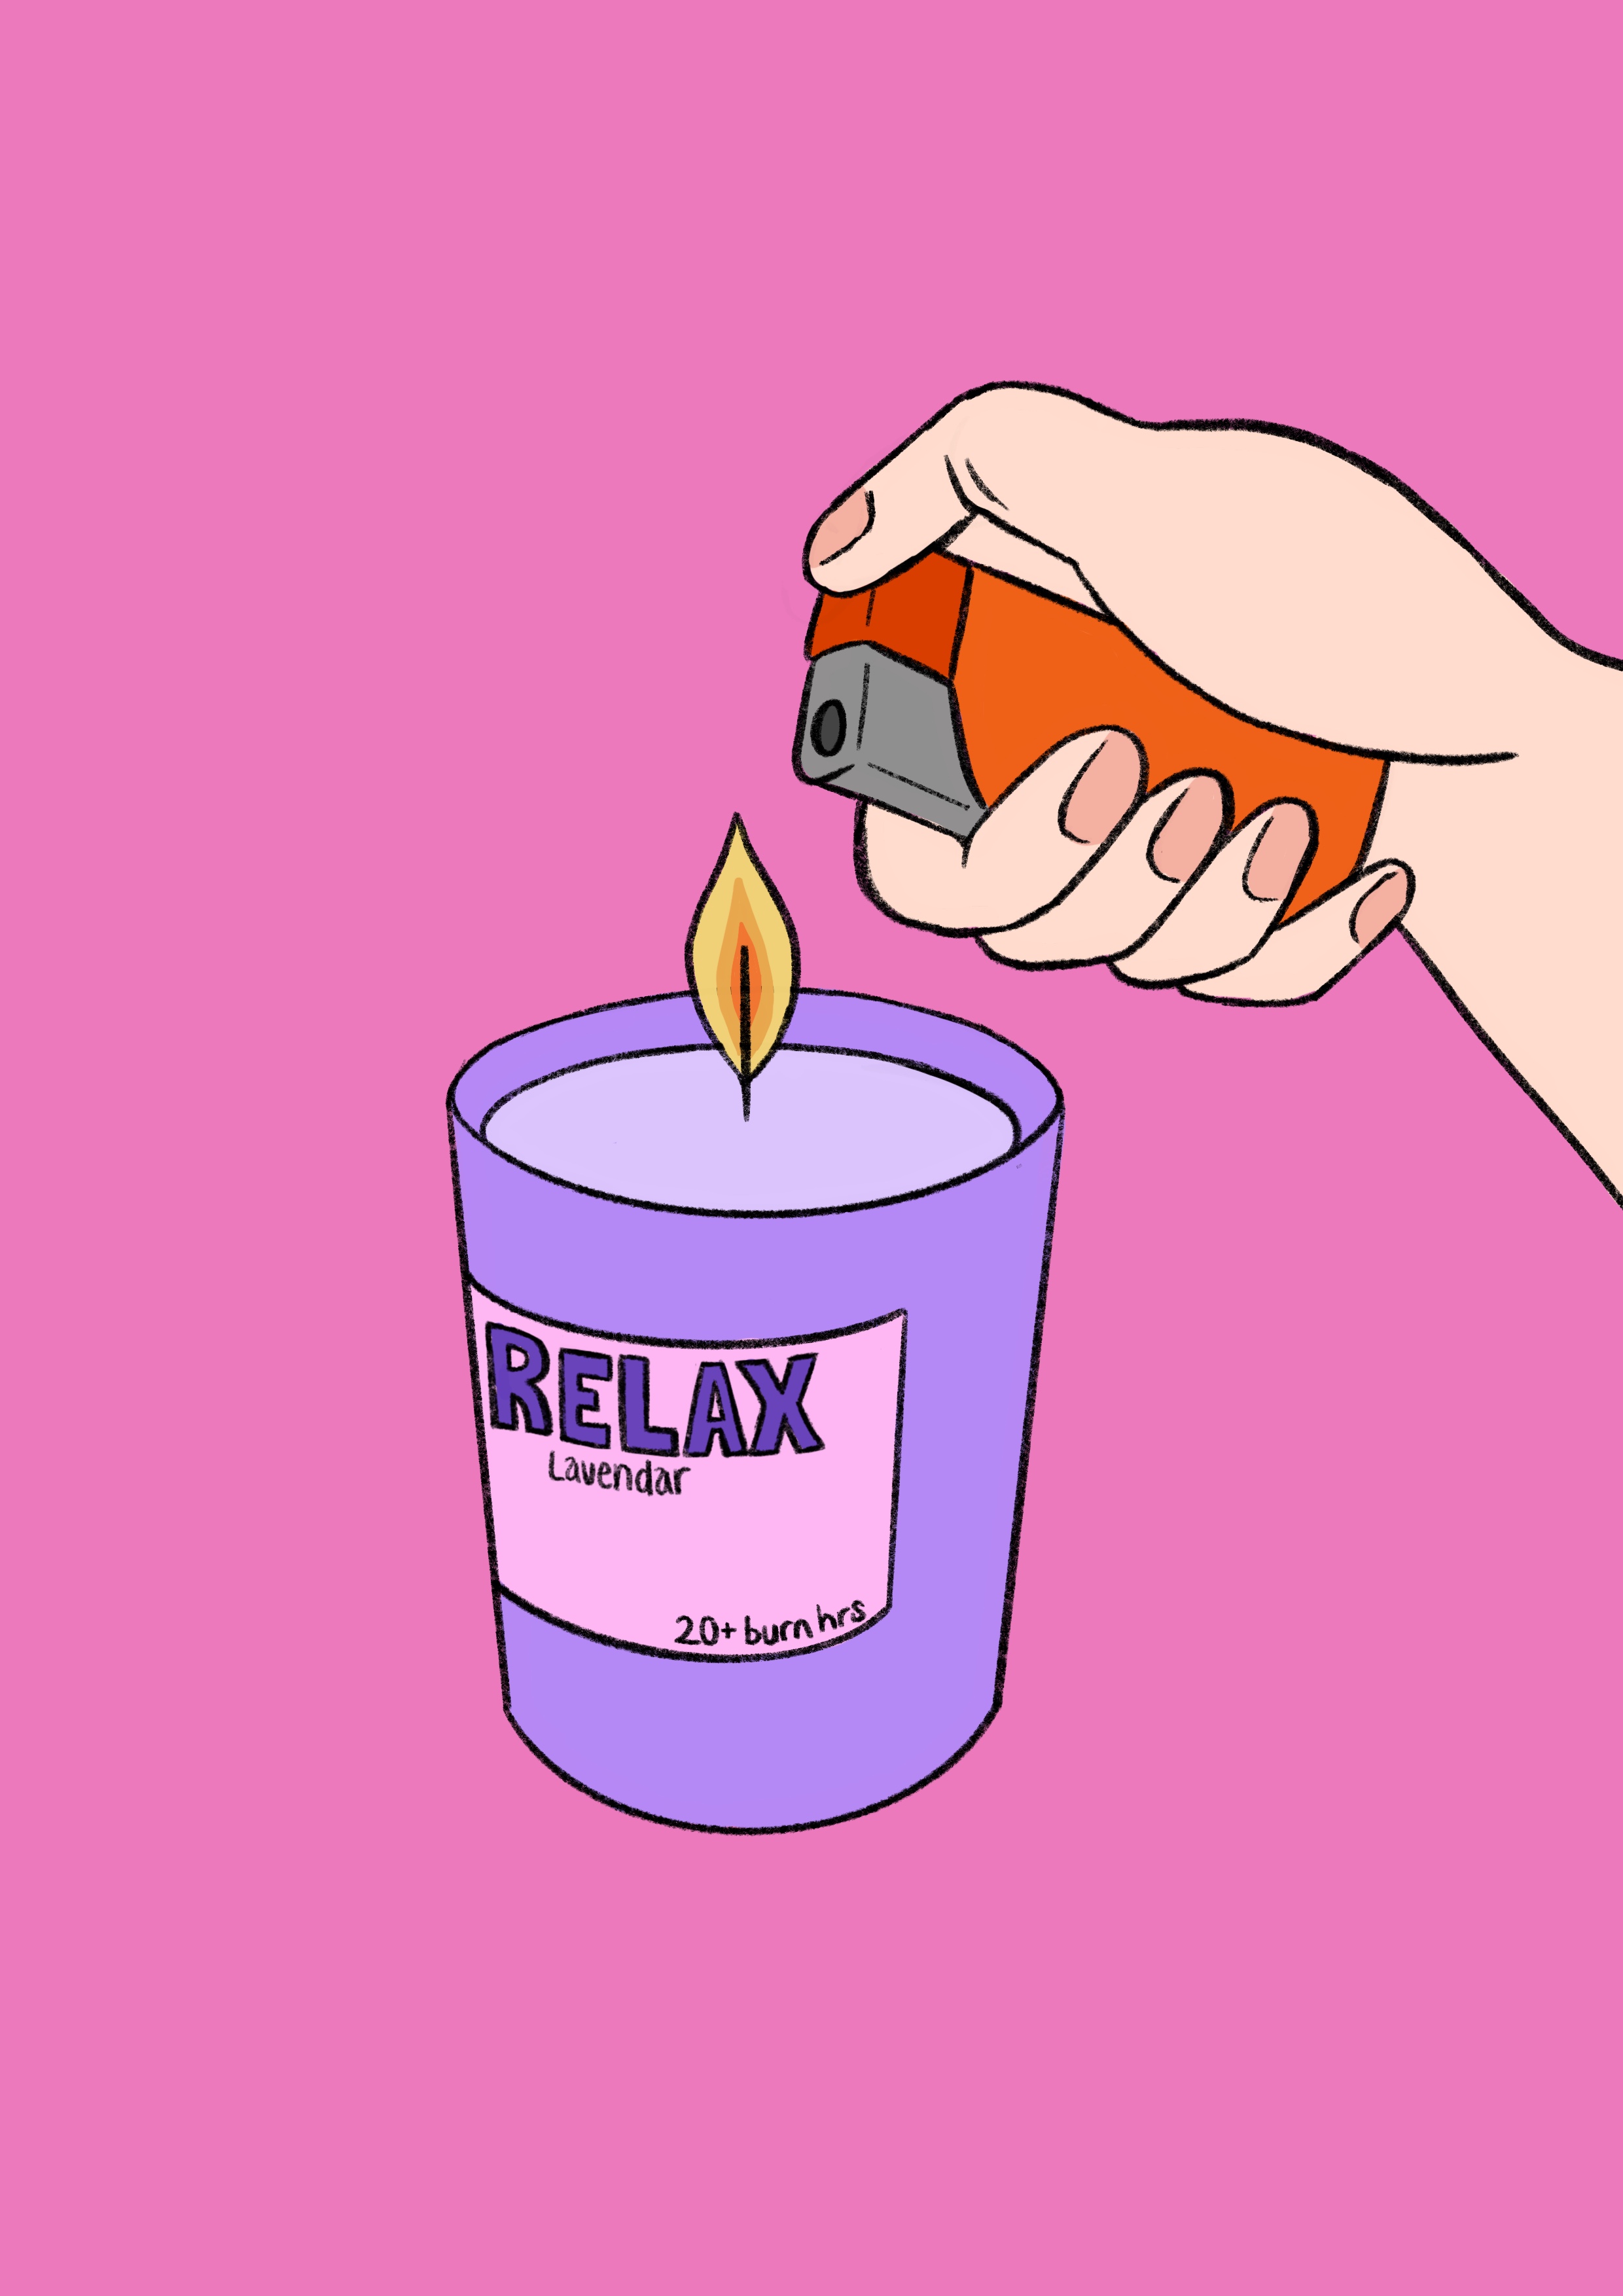 A short animation by Amy Maguire of a candle being lit and burning.